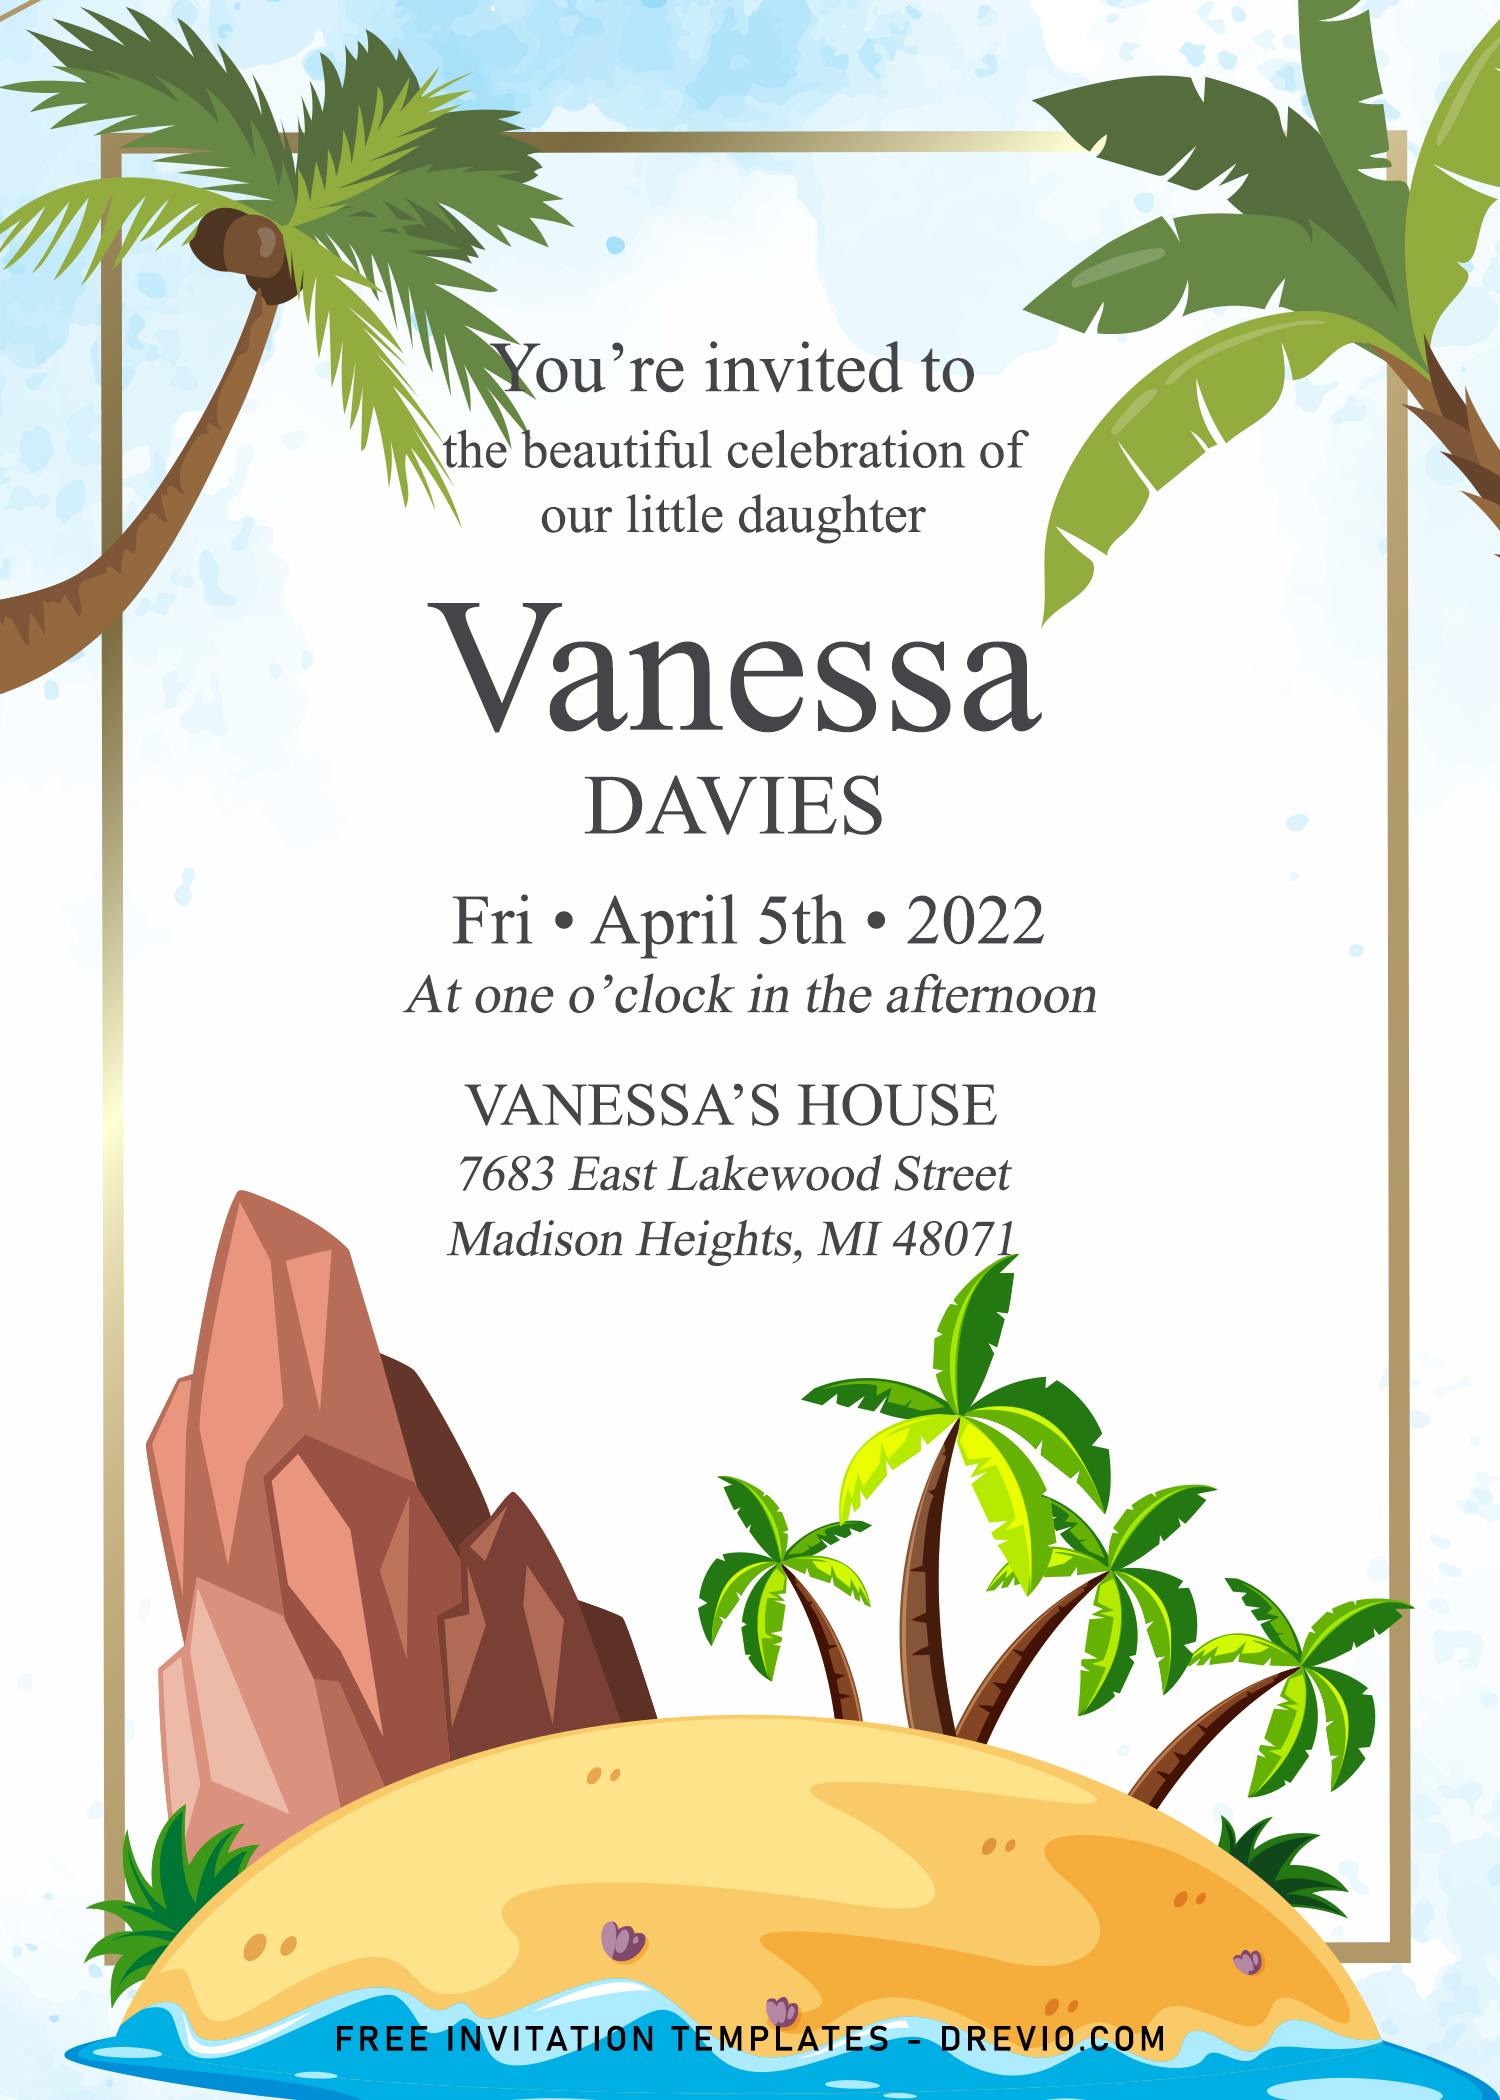 Ancient Decorations - Free Invitation Template, Greetings Island